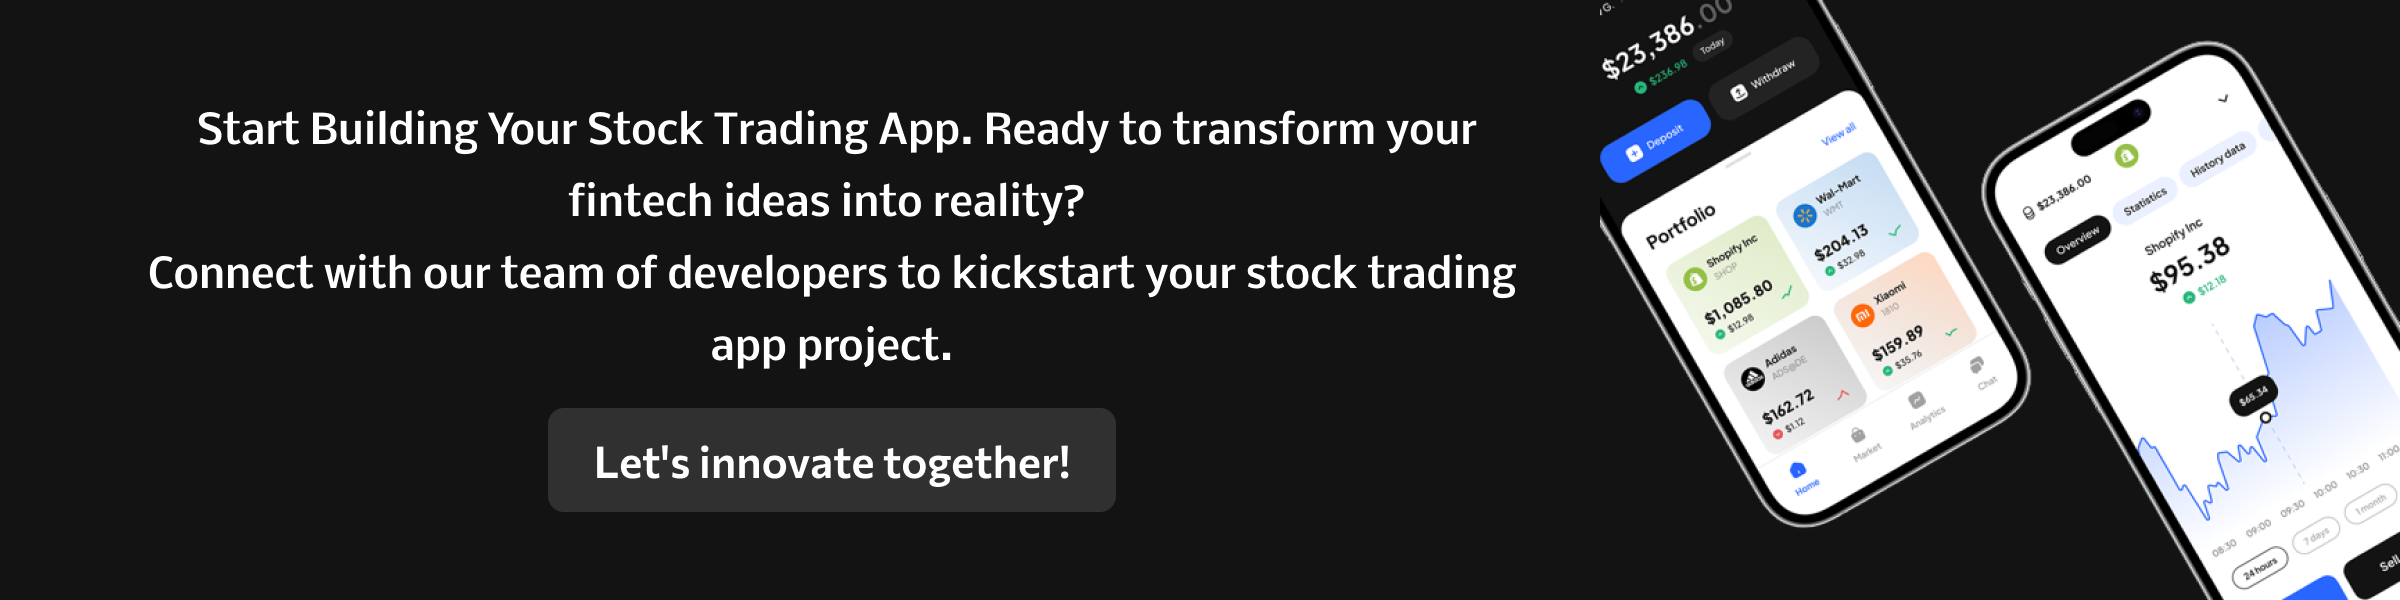 Contact for stock trading app development 